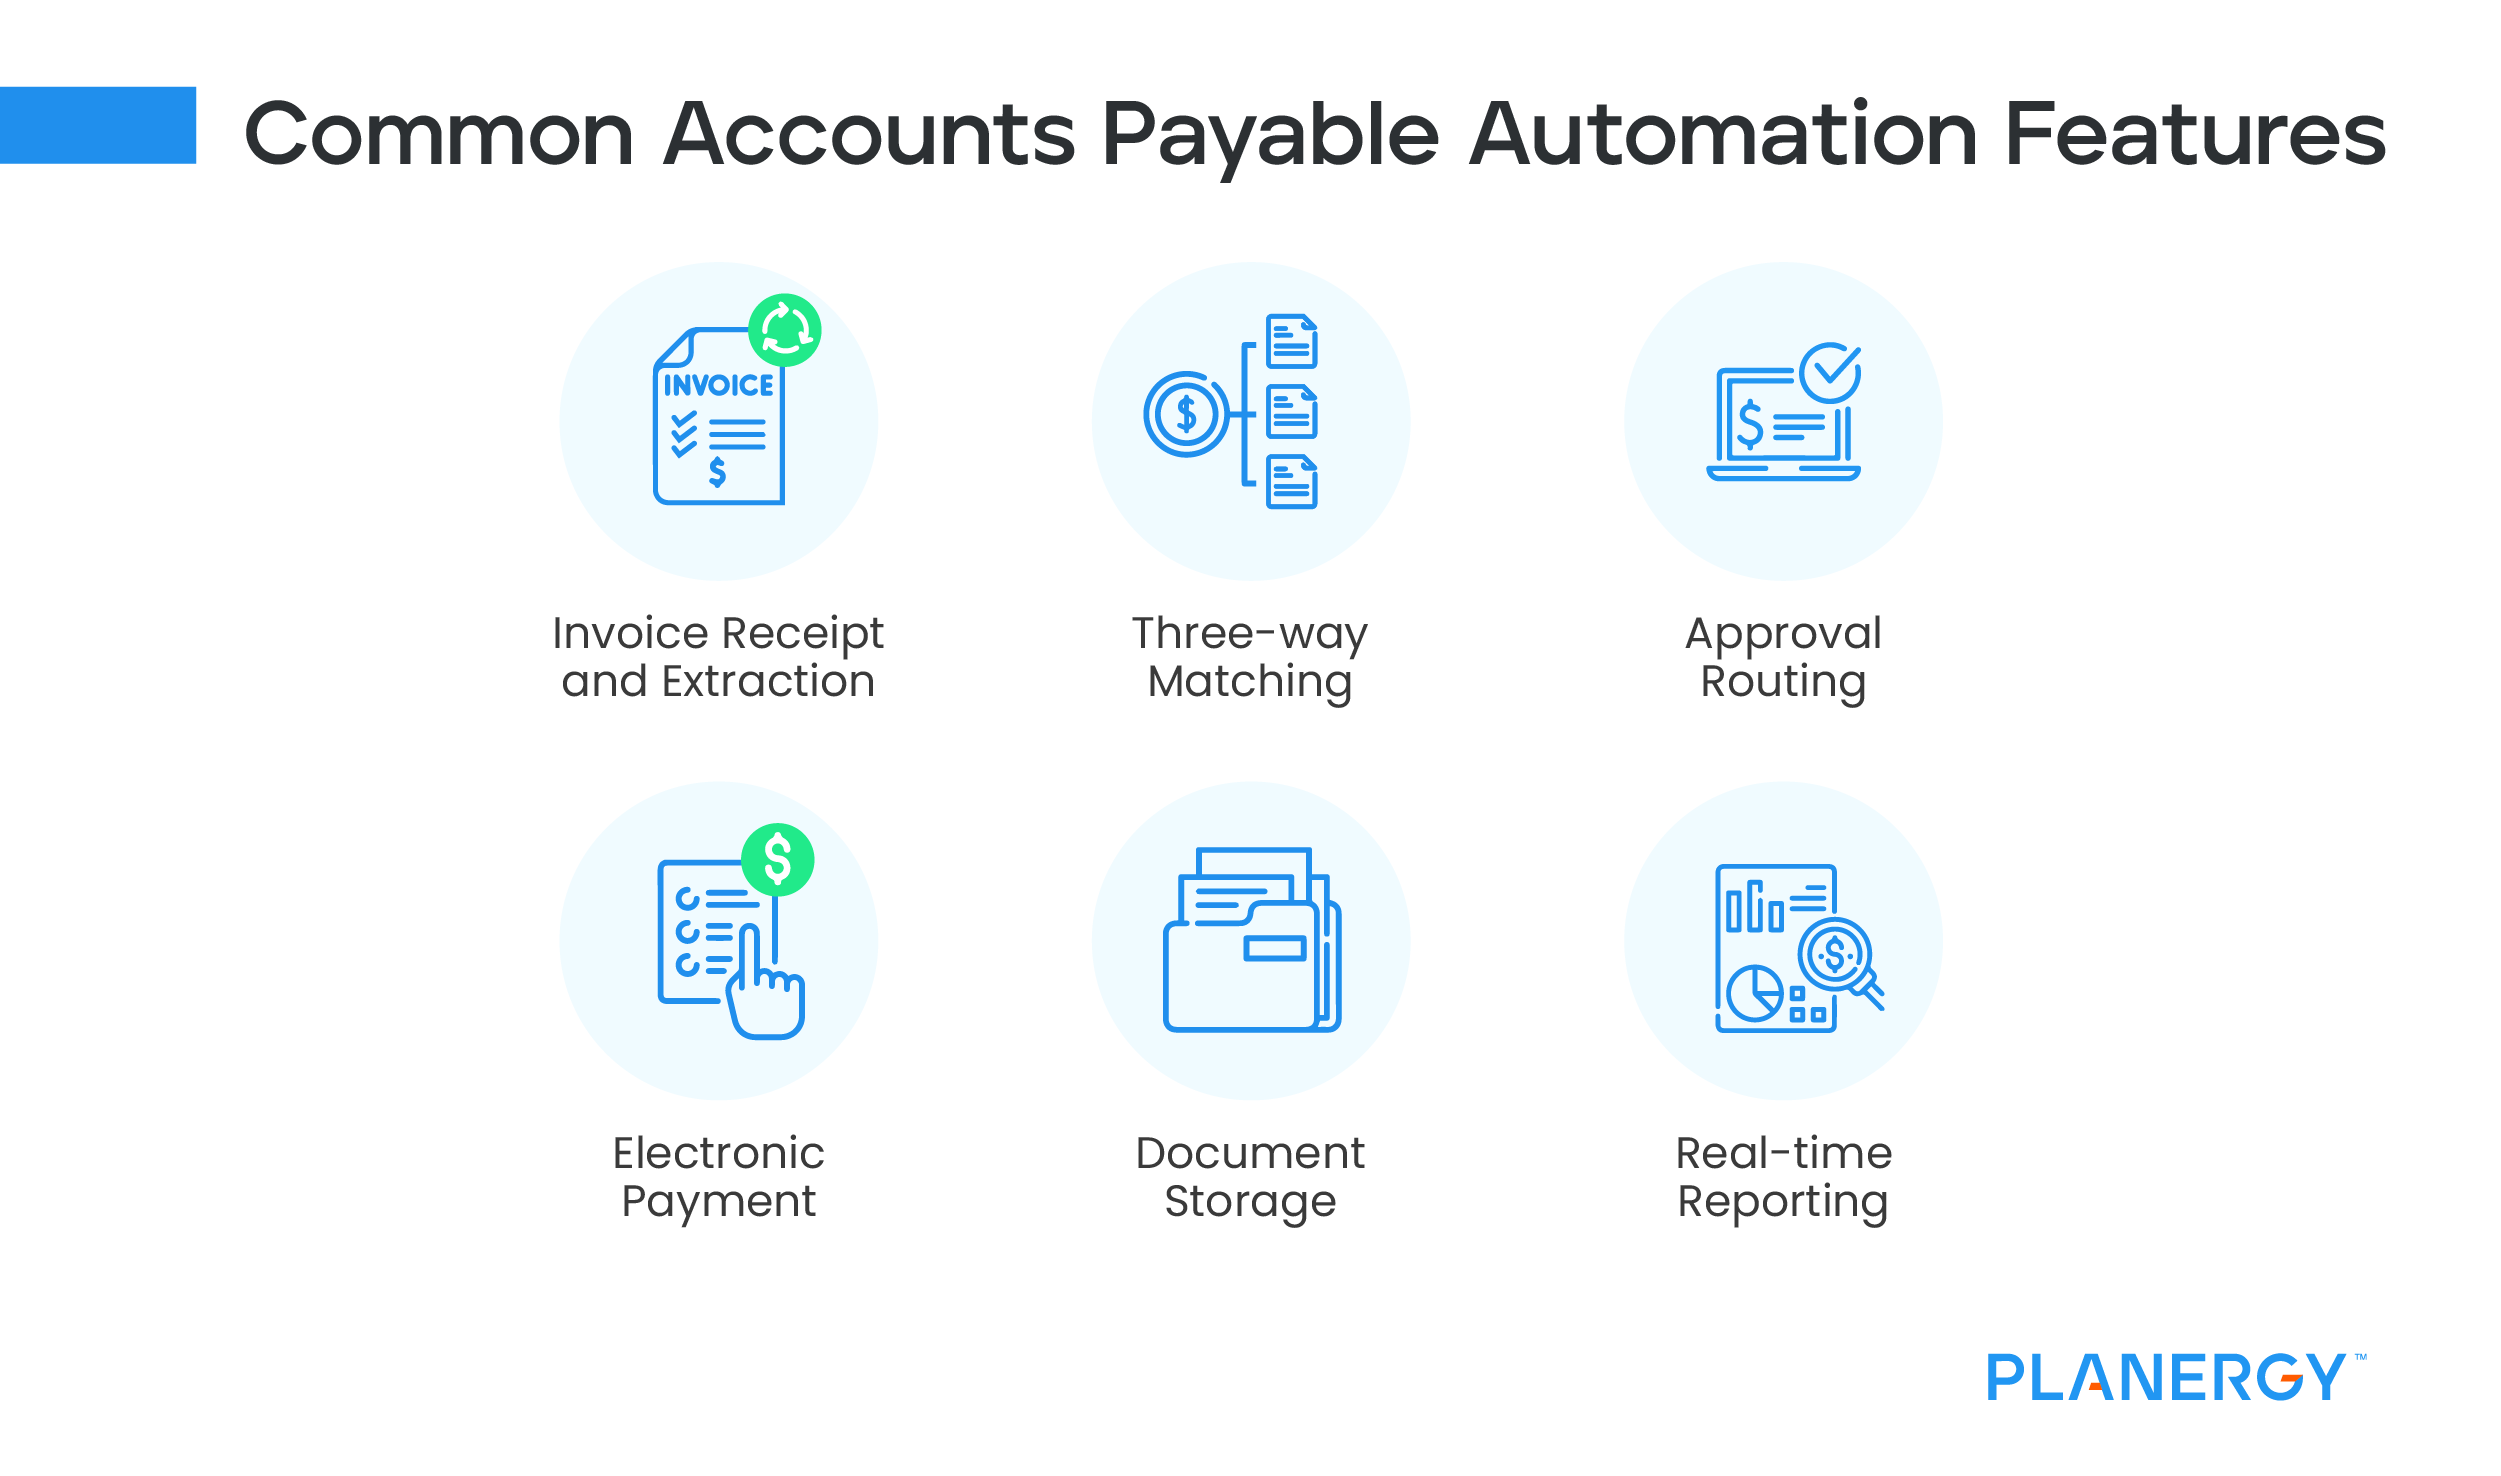 Common Accounts Payable Automation Features